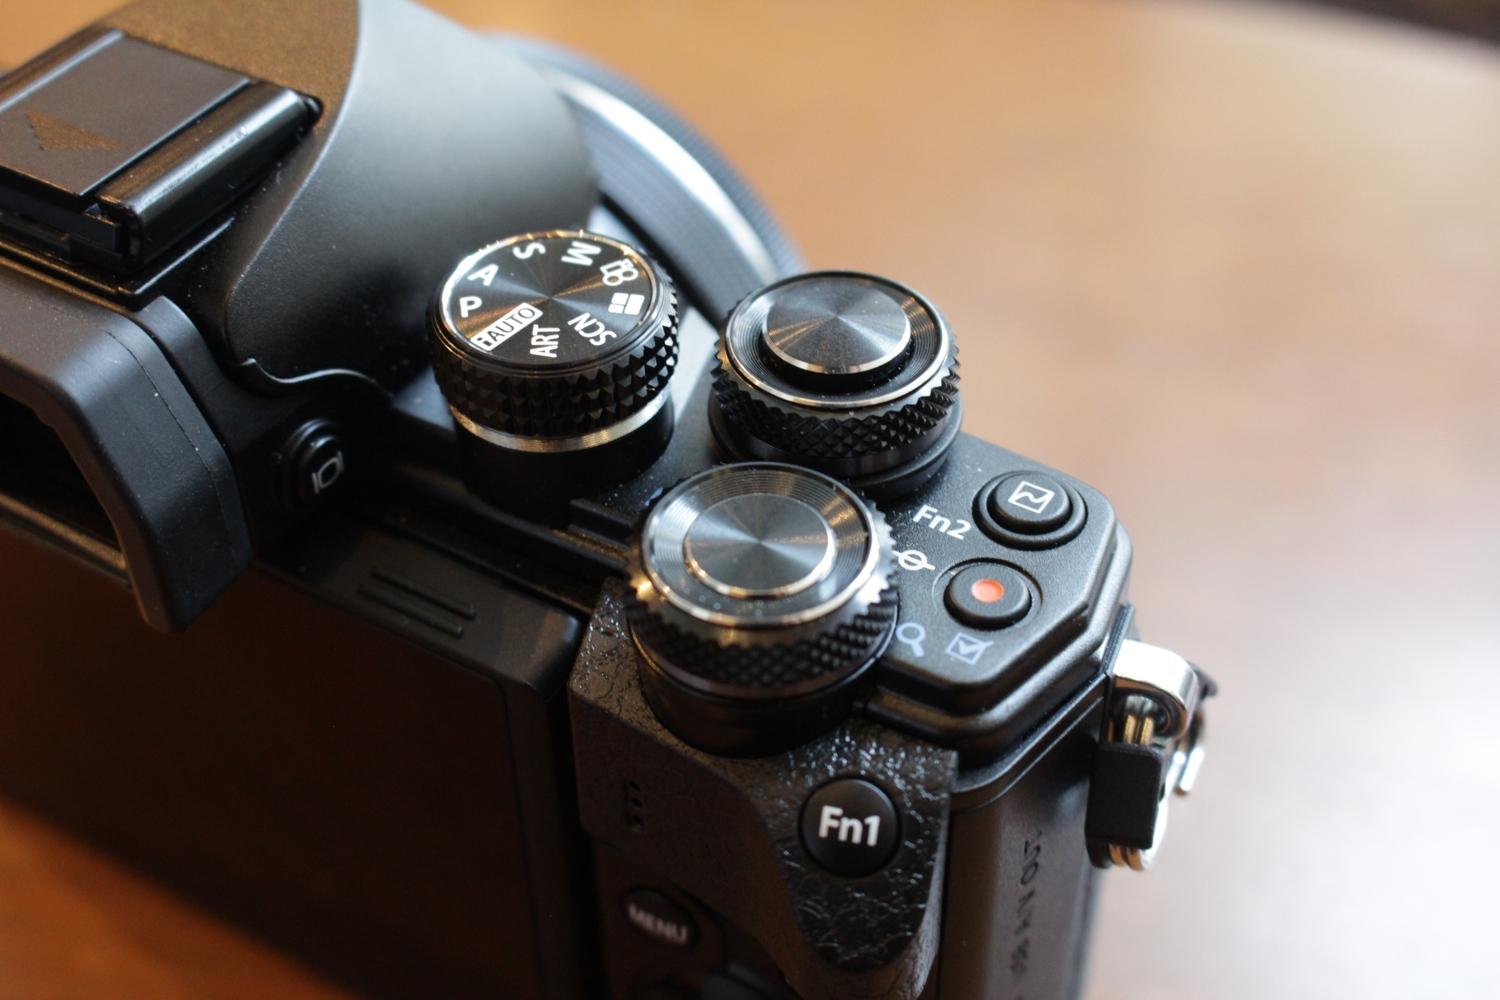 olympus gives entry level om d e m10 mirrorless camera big upgrades e10mkii 18